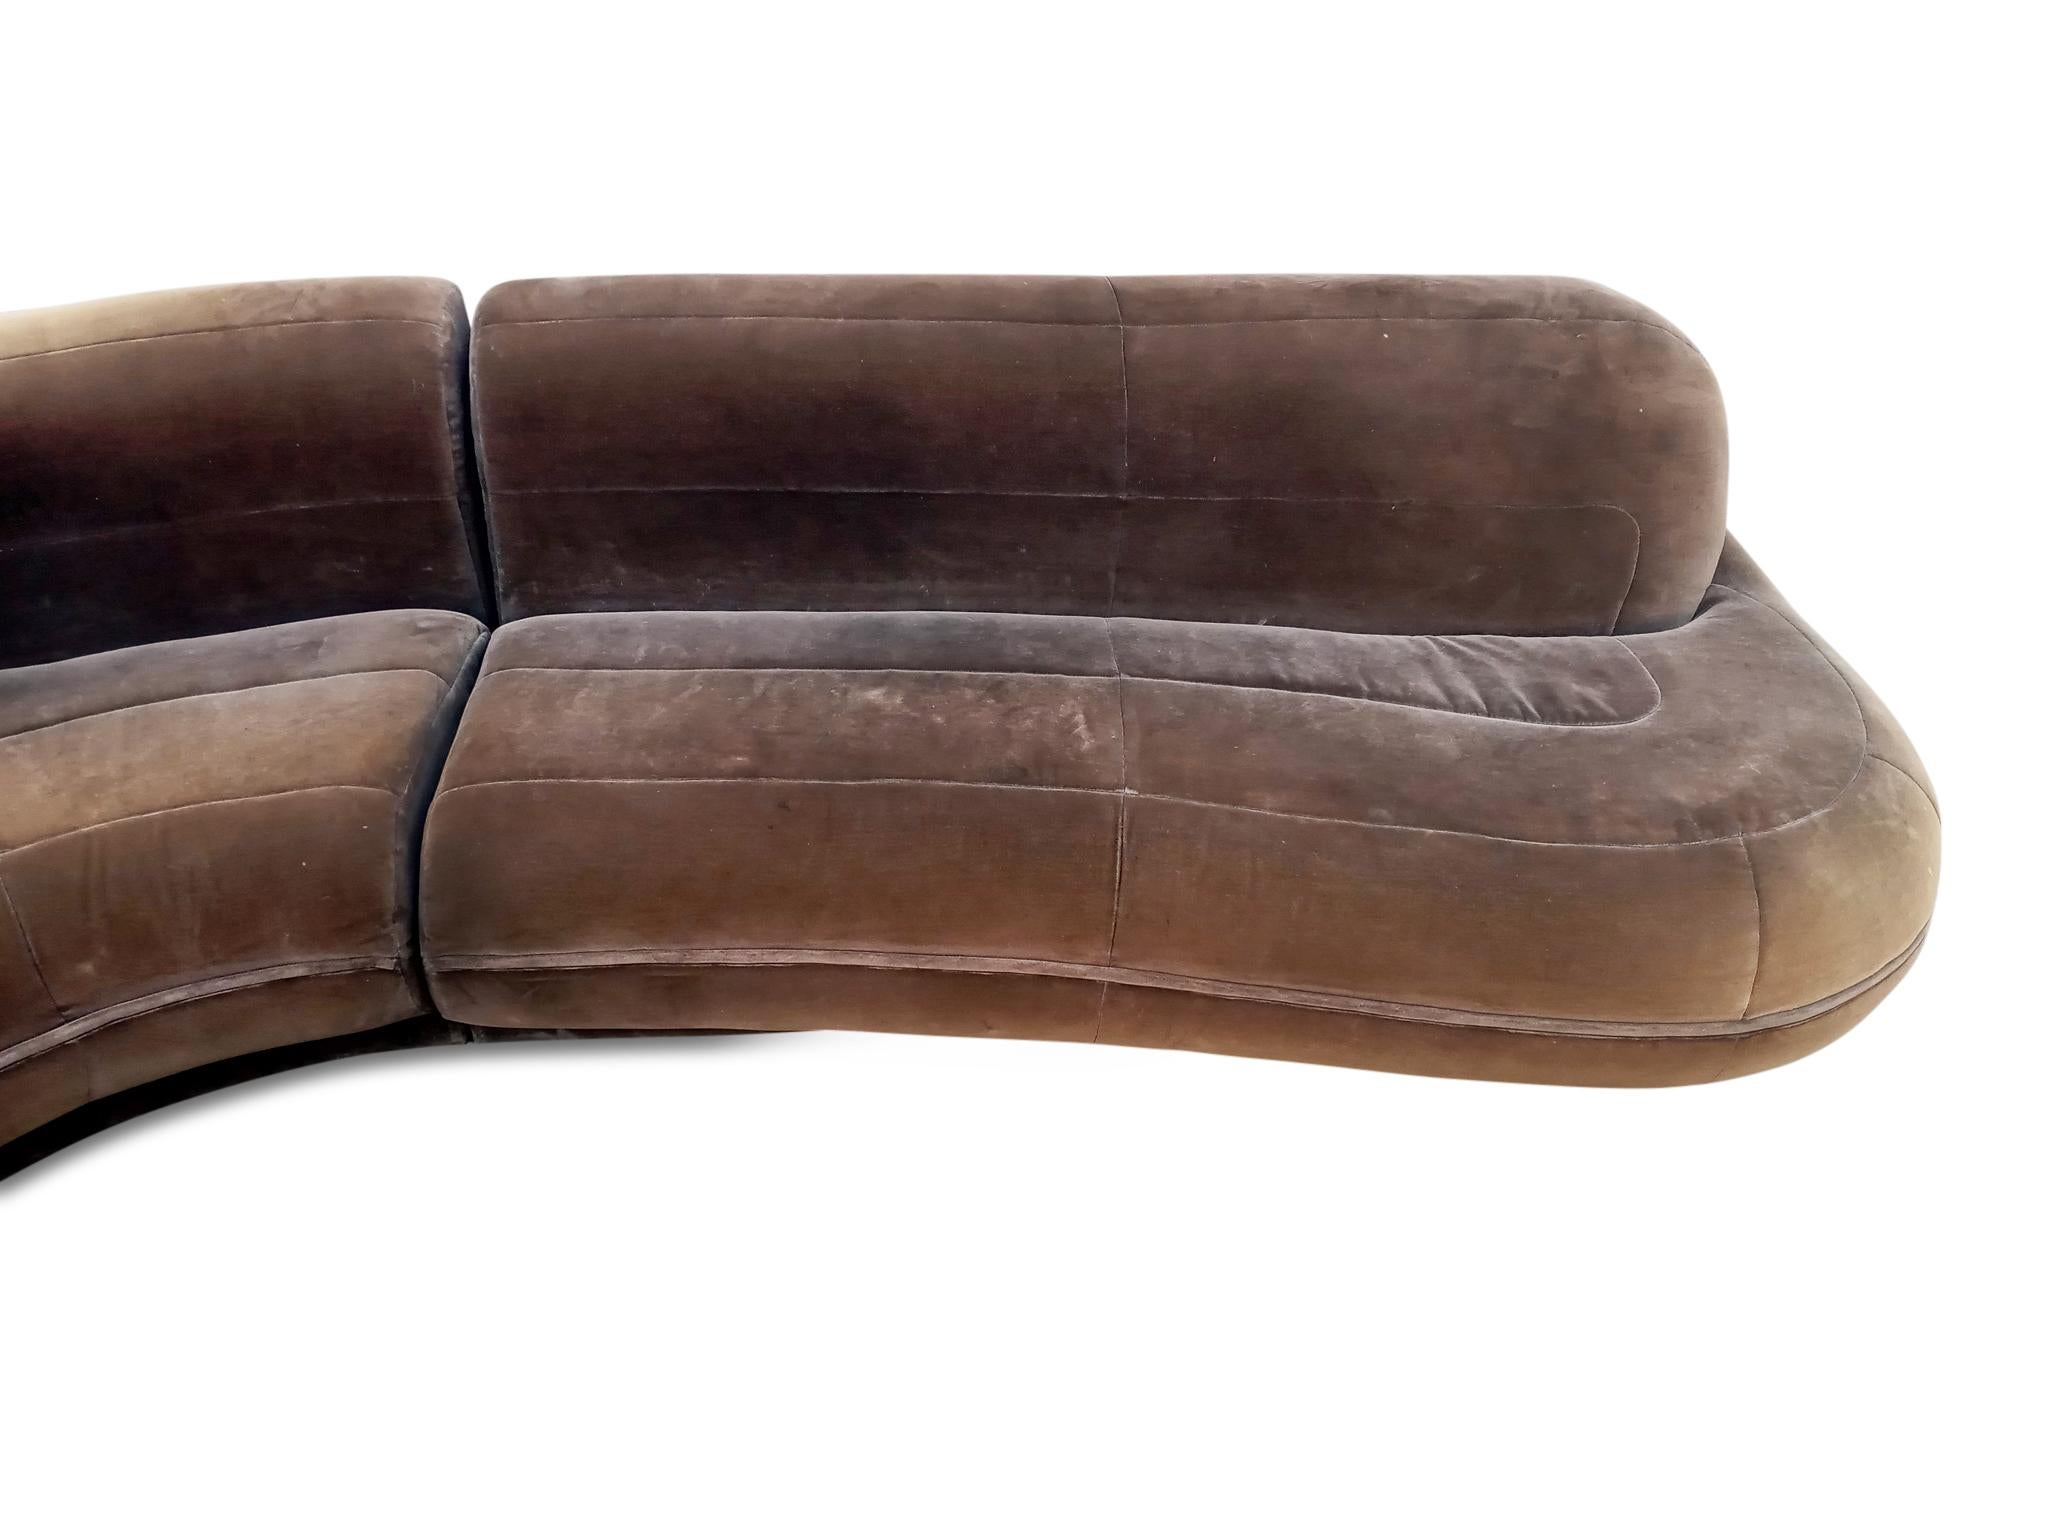 Upholstery M. Fillmore Harty, Preview Super Sculptural Signed 3 Part Sectional Sofa 1990s